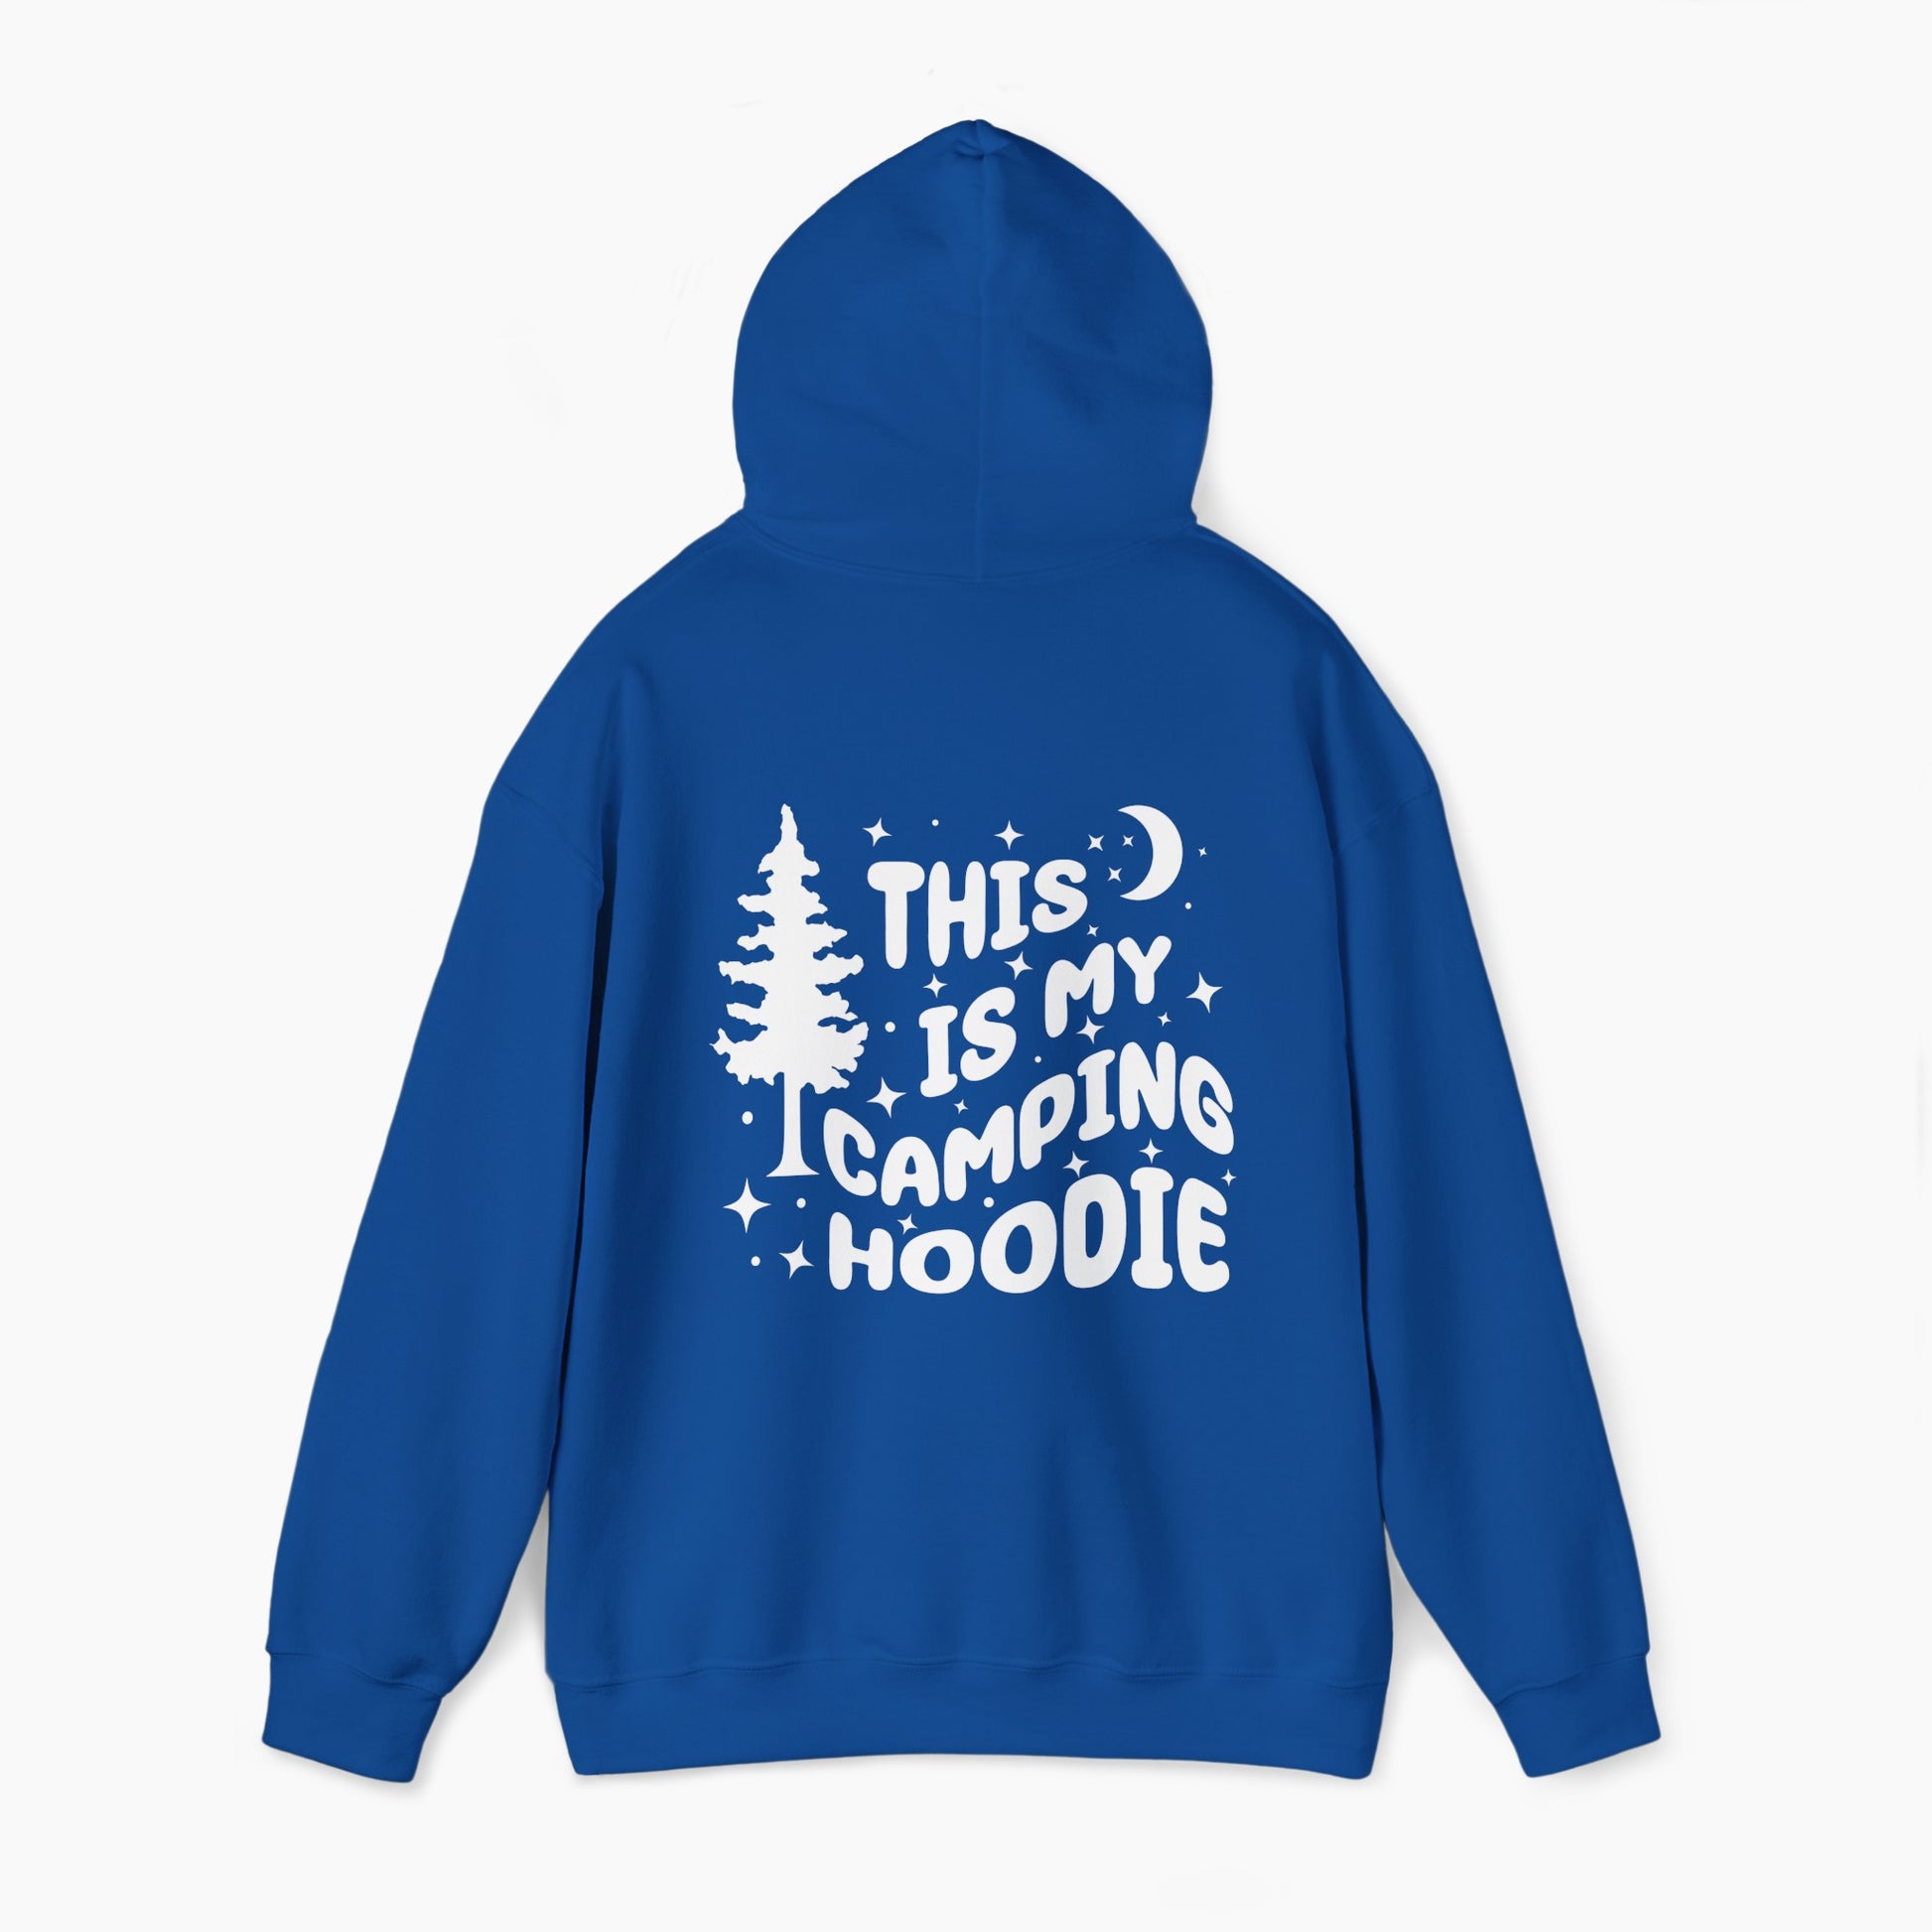 Back of blue hoodie featuring the text 'This is my camping hoodie,' with a design of a camping van, moon, stars, and a tree on a plain background.